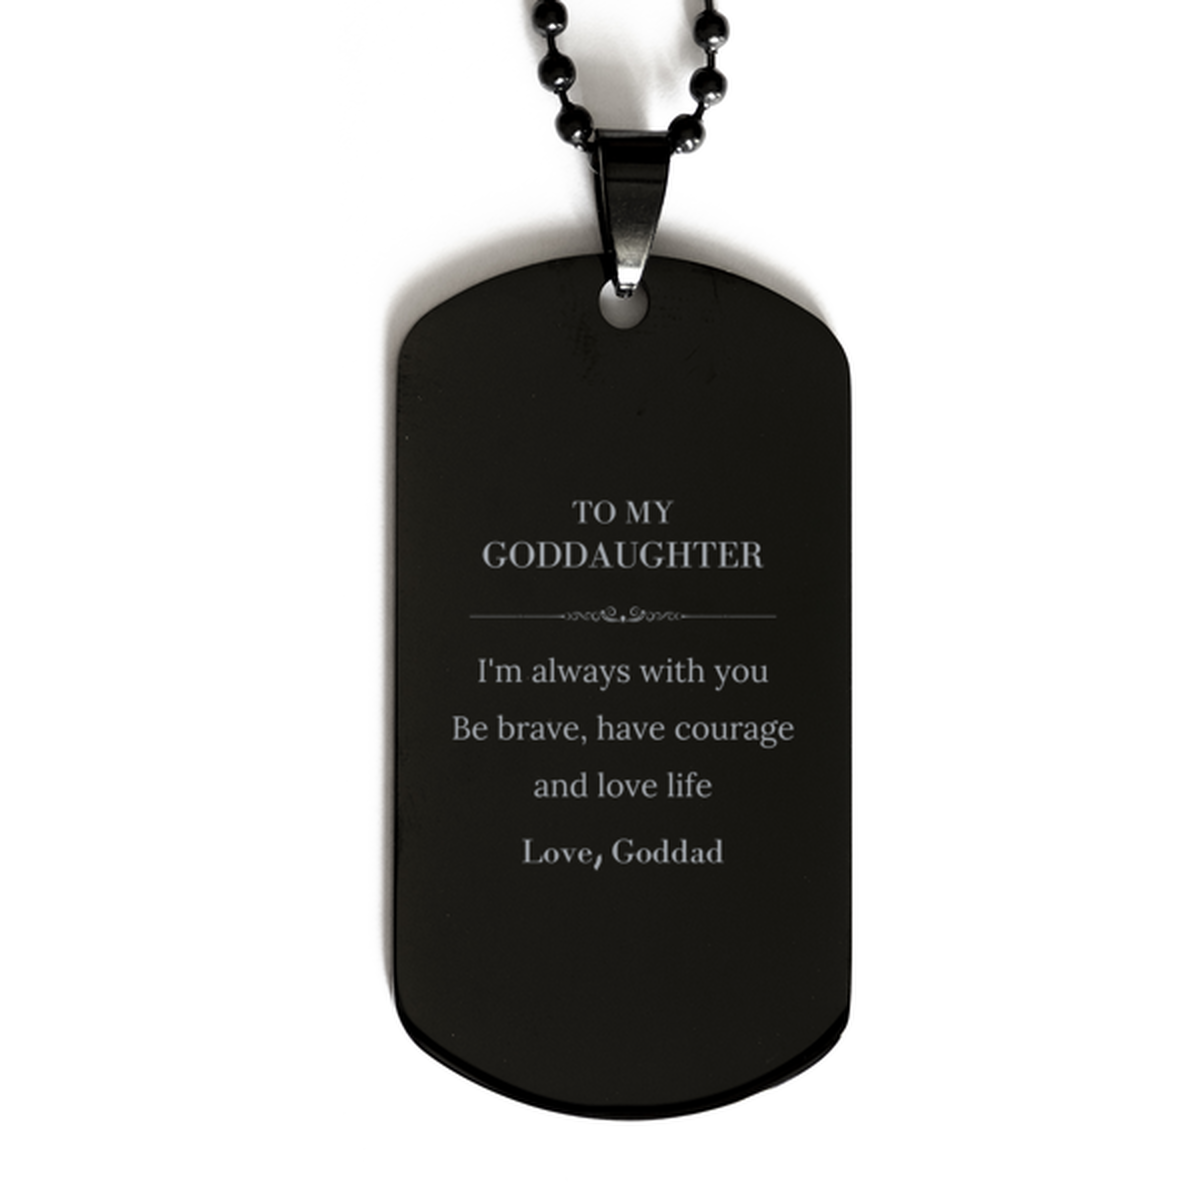 To My Goddaughter Gifts from Goddad, Unique Black Dog Tag Inspirational Christmas Birthday Graduation Gifts for Goddaughter I'm always with you. Be brave, have courage and love life. Love, Goddad